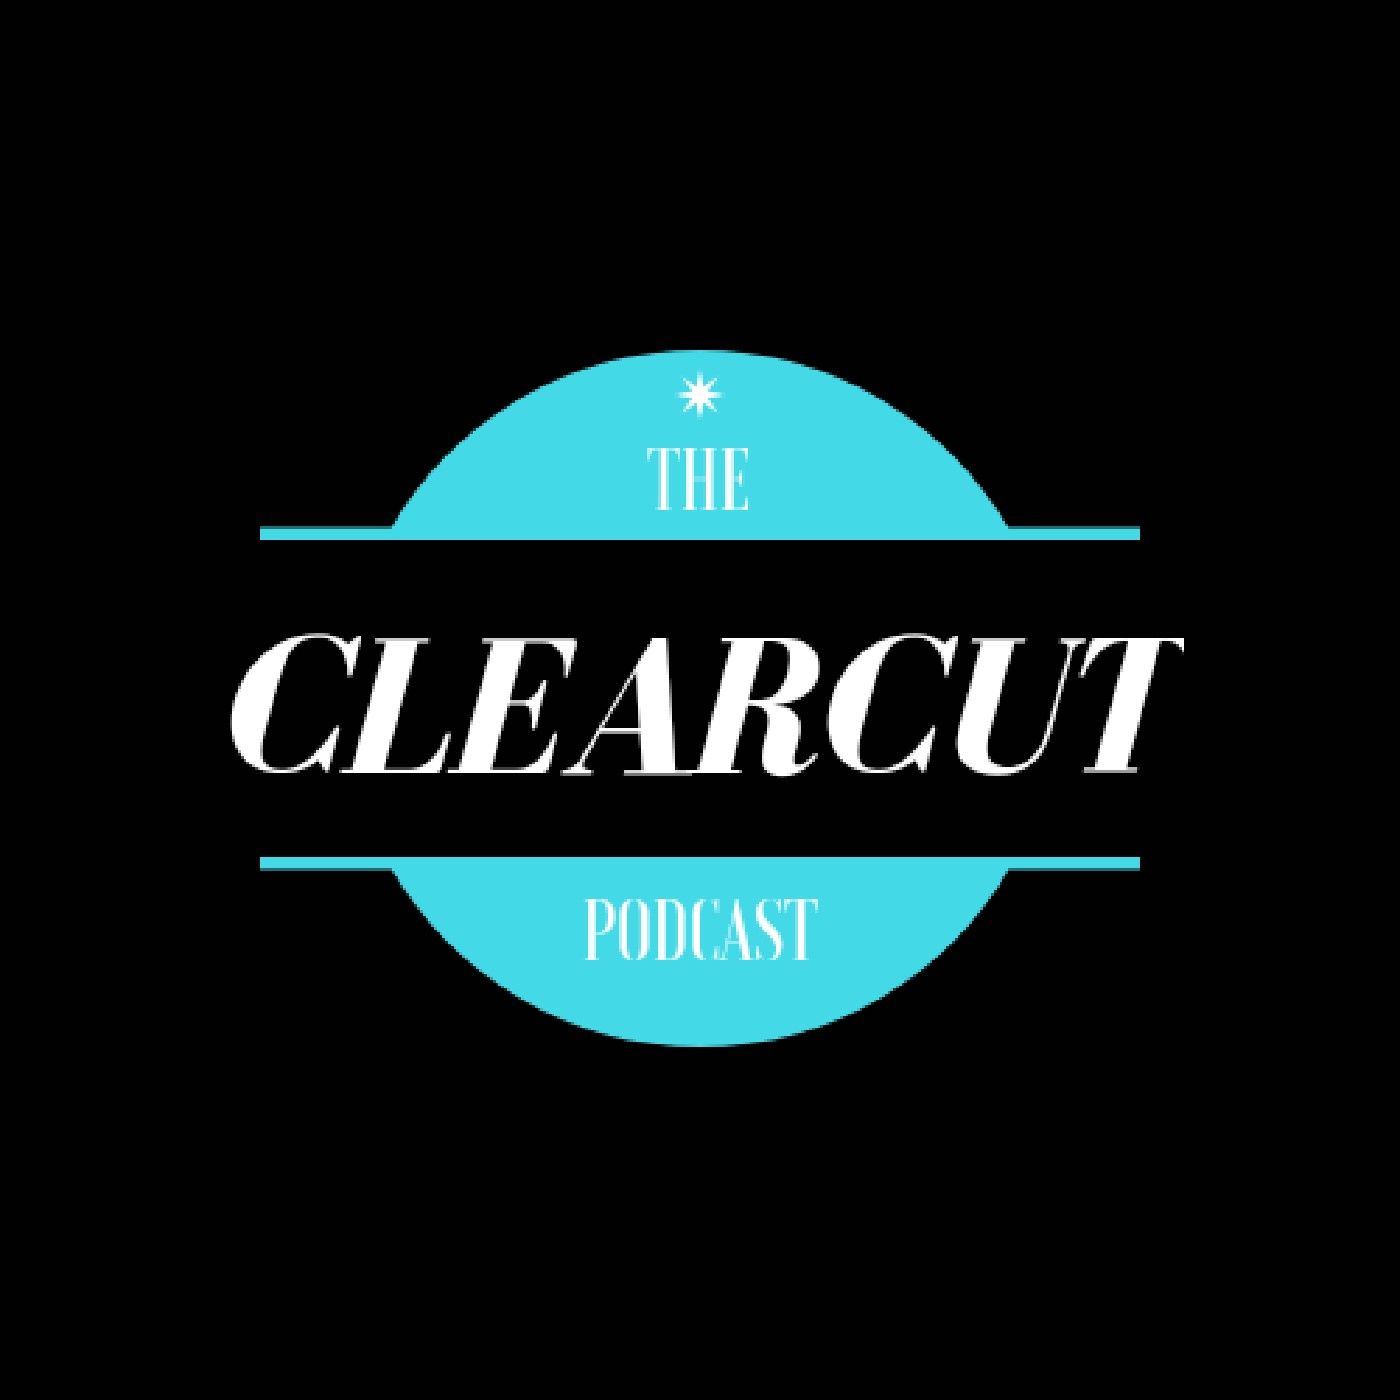 ClearCut Podcast